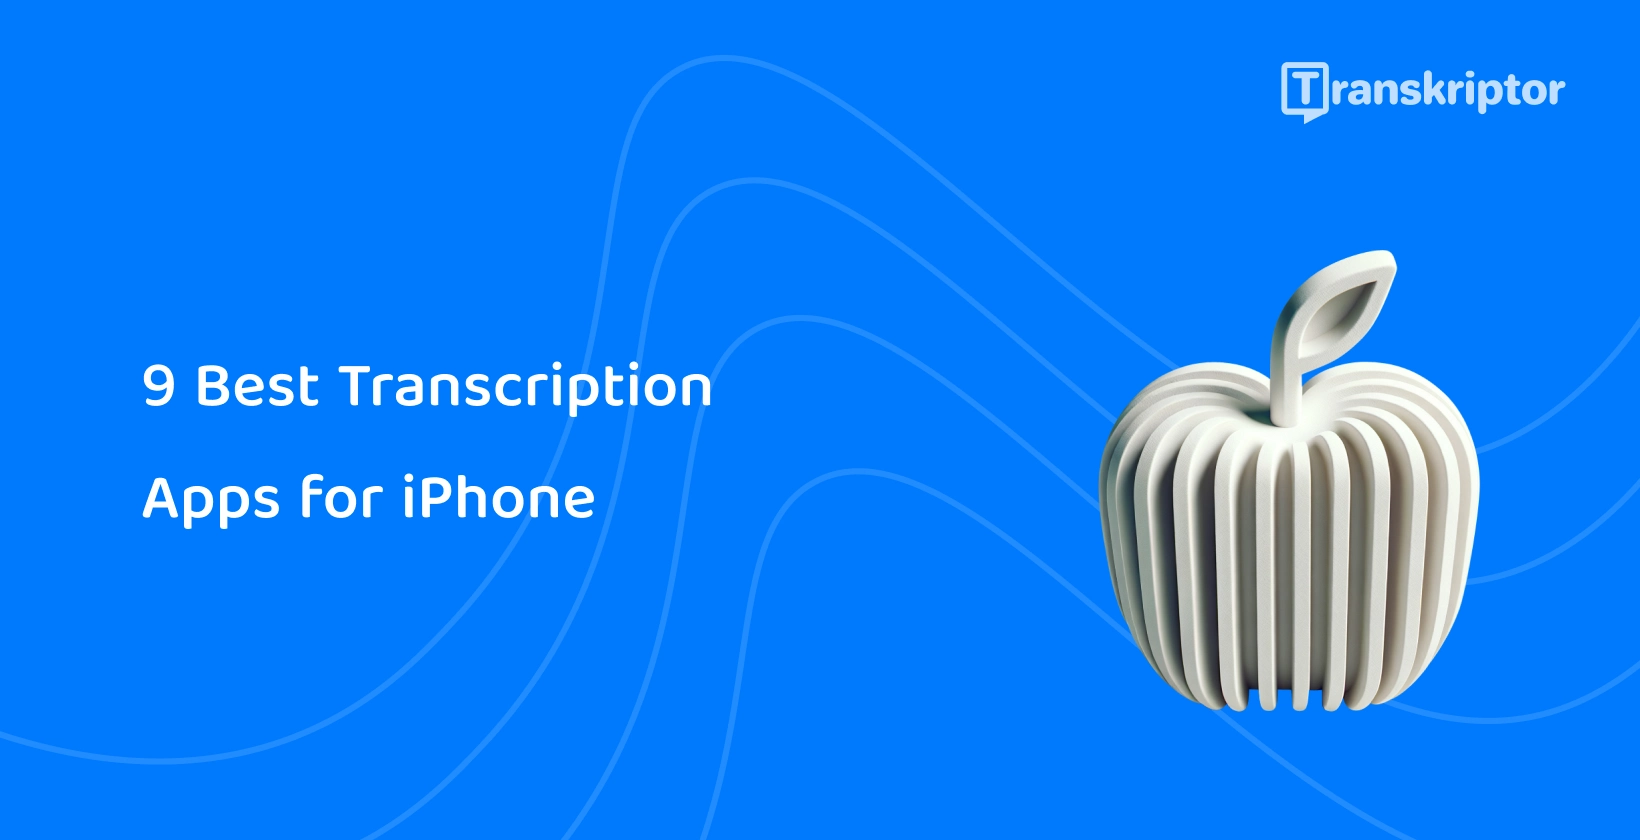 Stylized apple with sound waves represents the top transcription apps available for iPhone users.